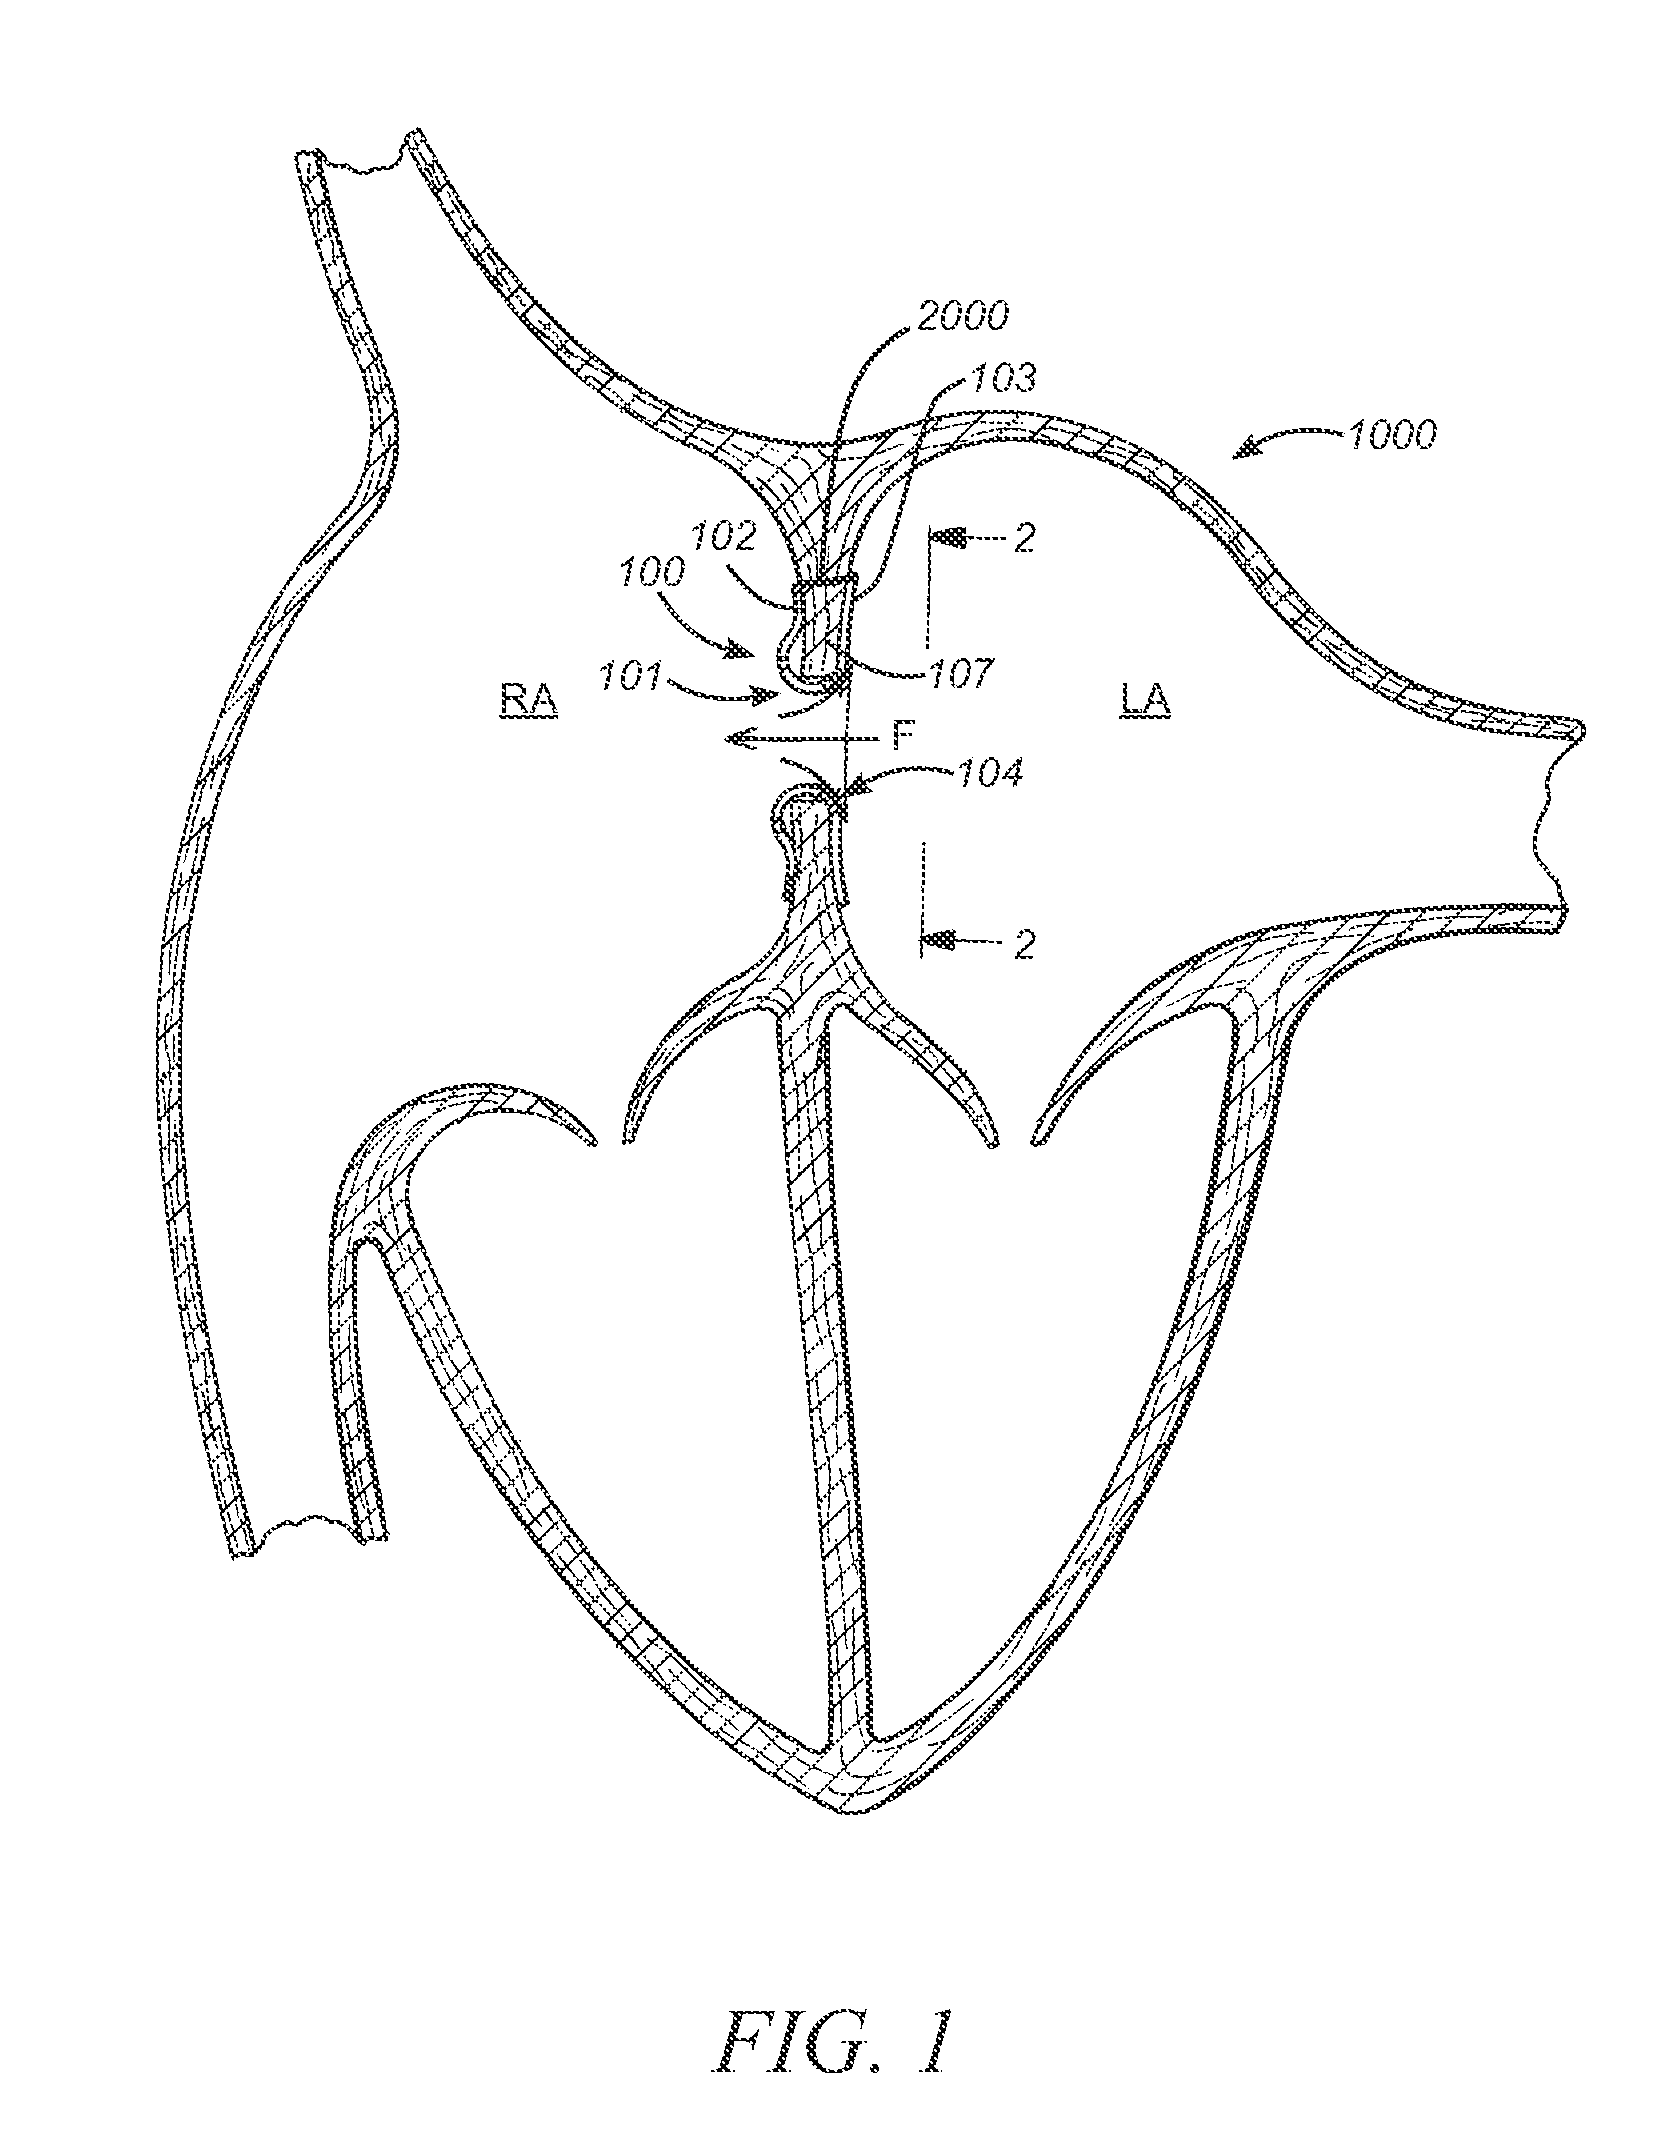 Prosthesis for reducing intra-cardiac pressure having an embolic filter